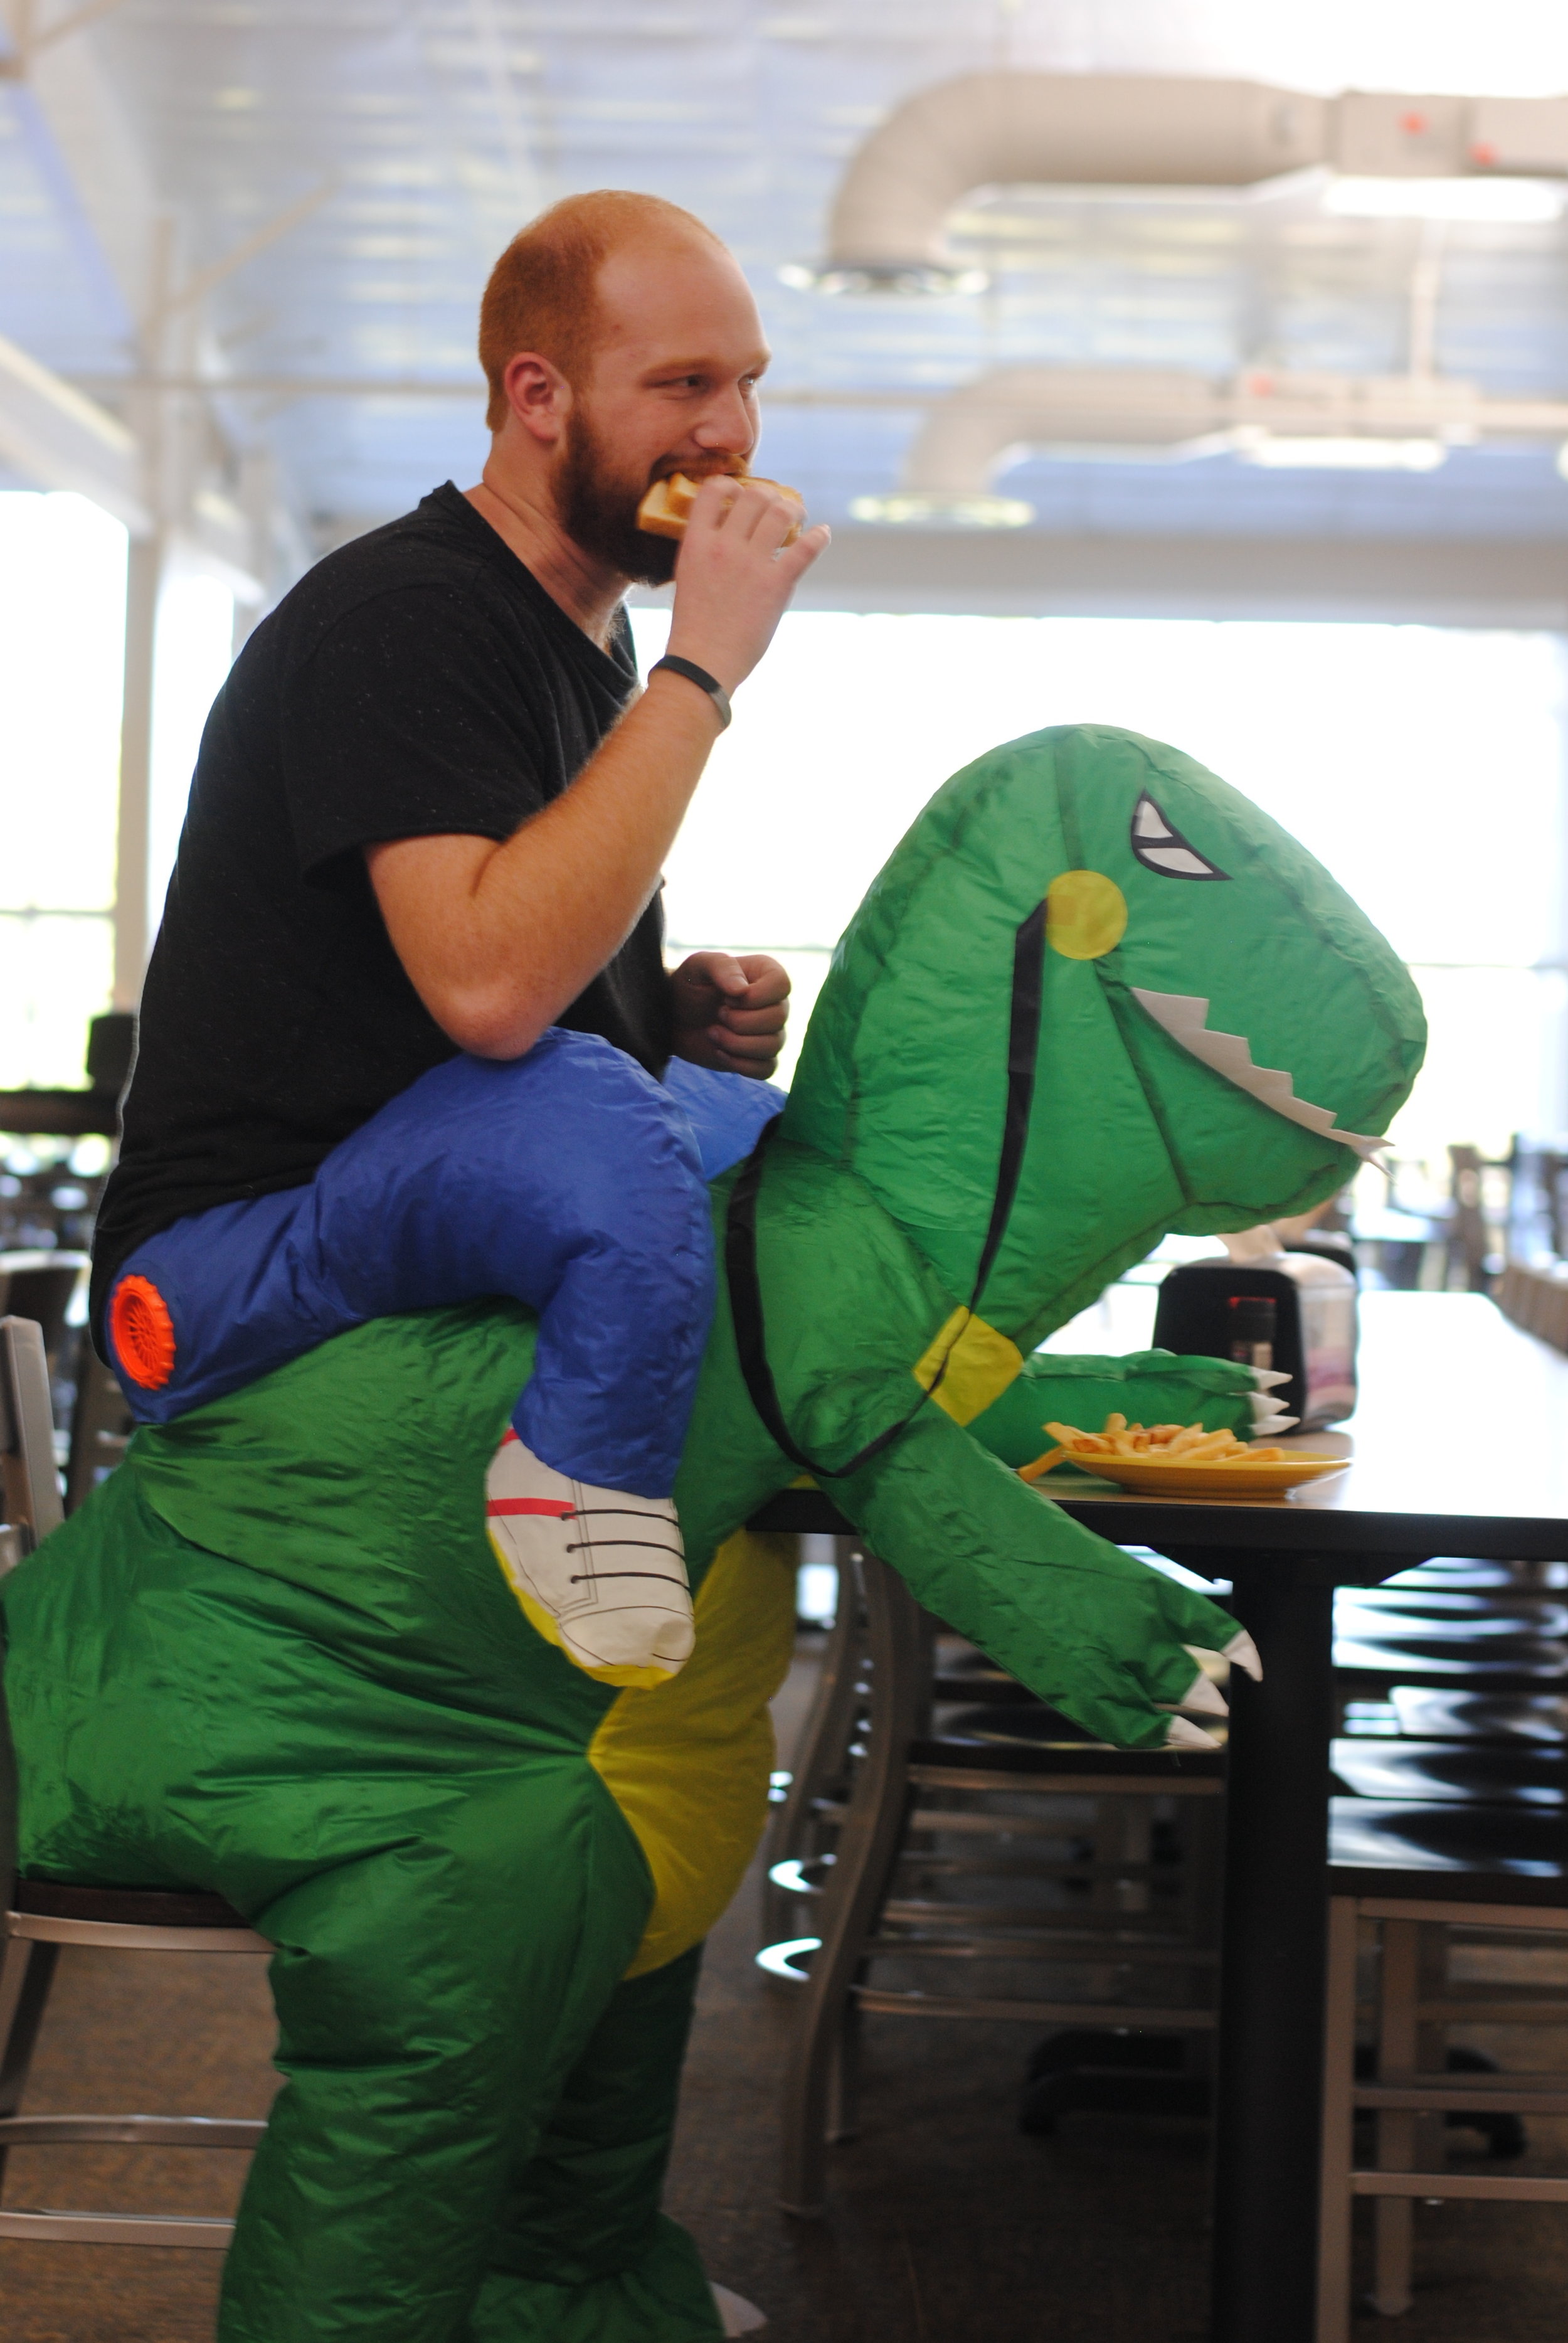 Danny the dinosaur always starts his day off right with a hearty meal in the cafeteria. Michael Blackwood (junior) is one of Danny's closest friends. They go everywhere together and are practically attached at the hip.